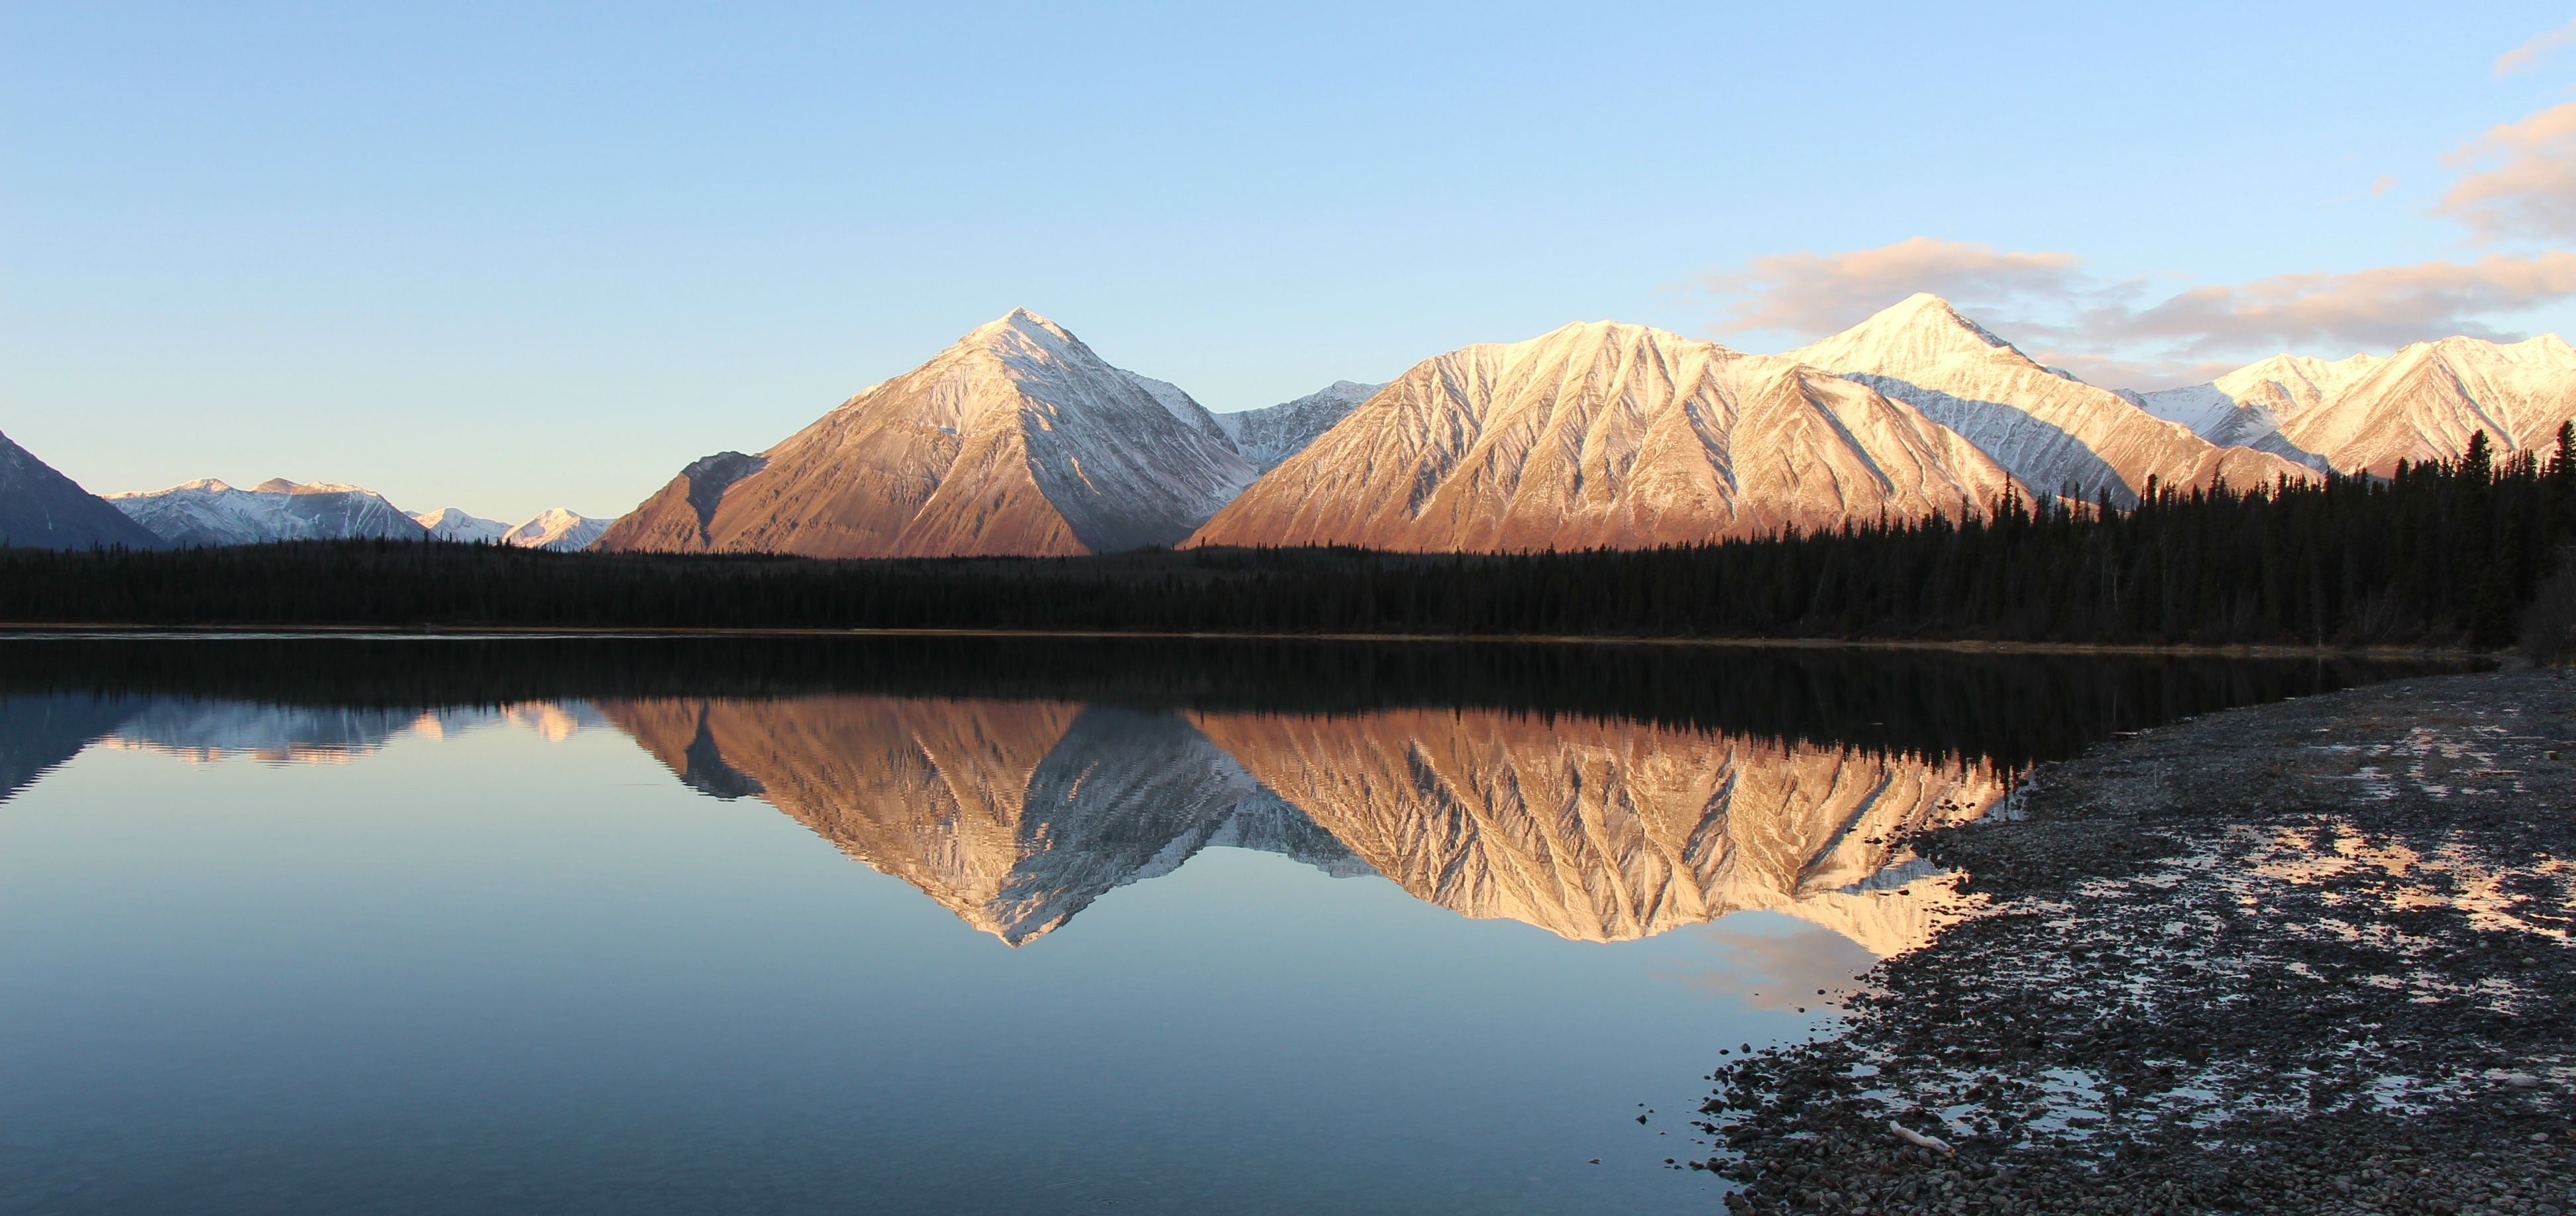 Yukon 4K wallpaper for your desktop or mobile screen free and easy to download